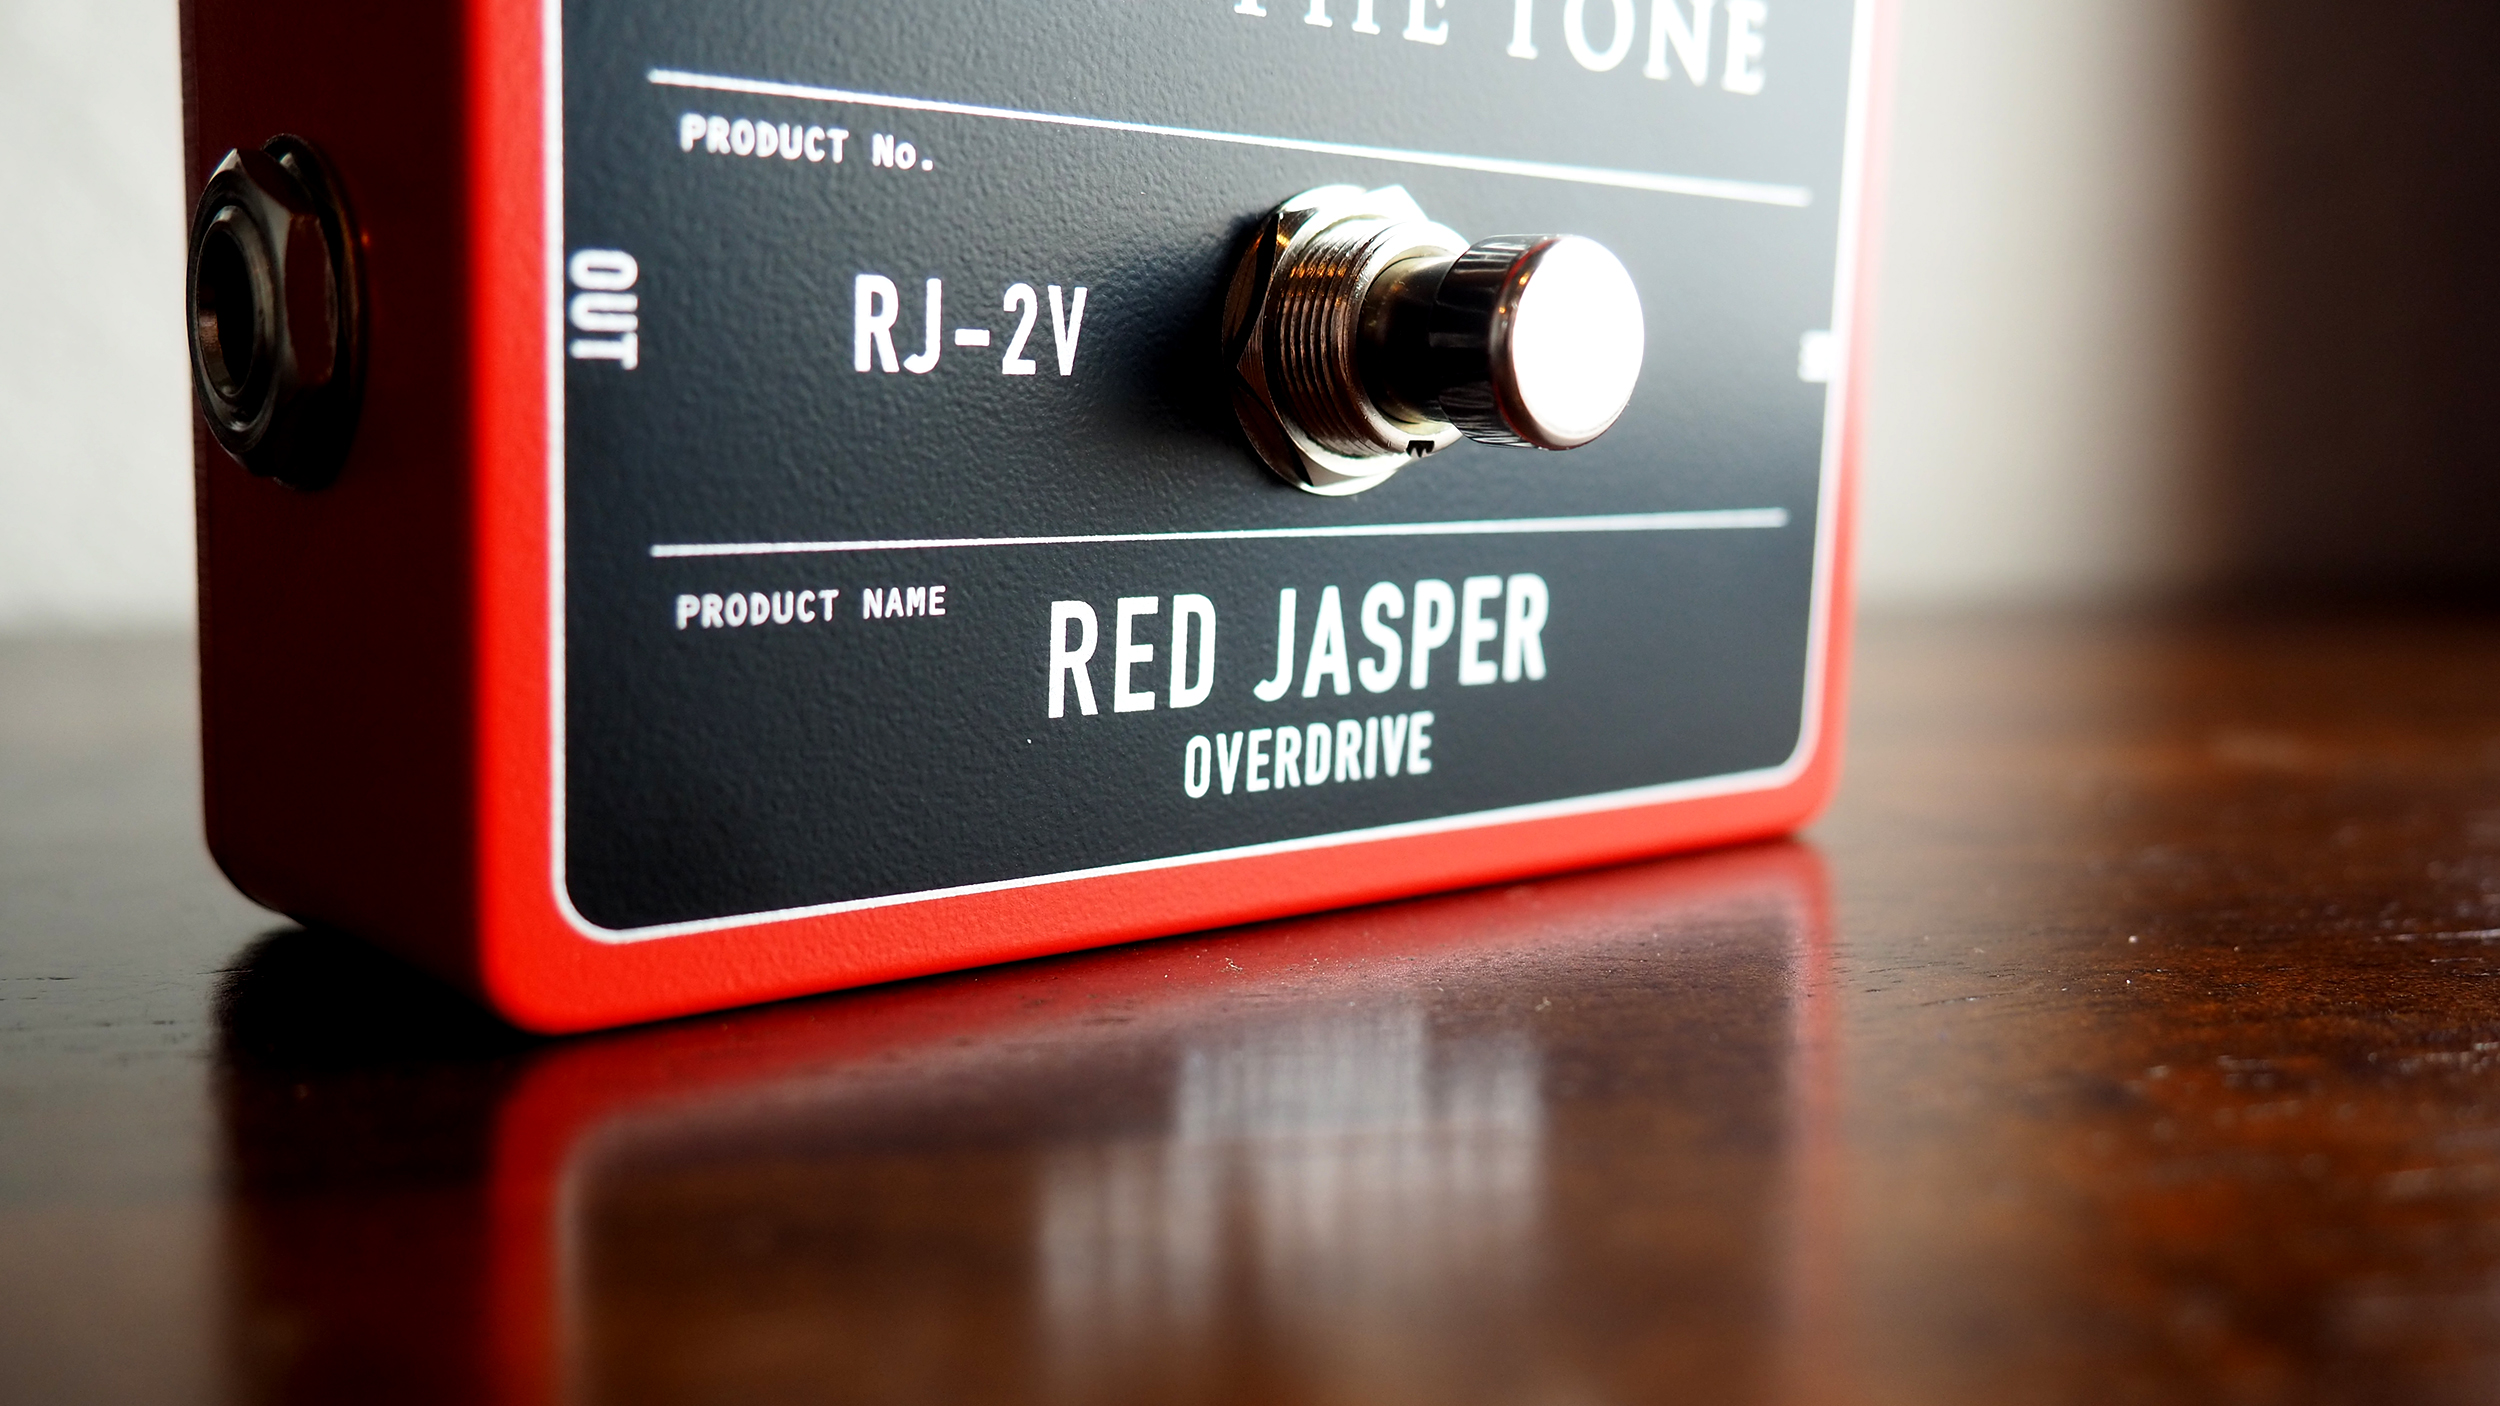 Free The Tone RJ-2V Red Jasper Overdrive - Pedal of the Day